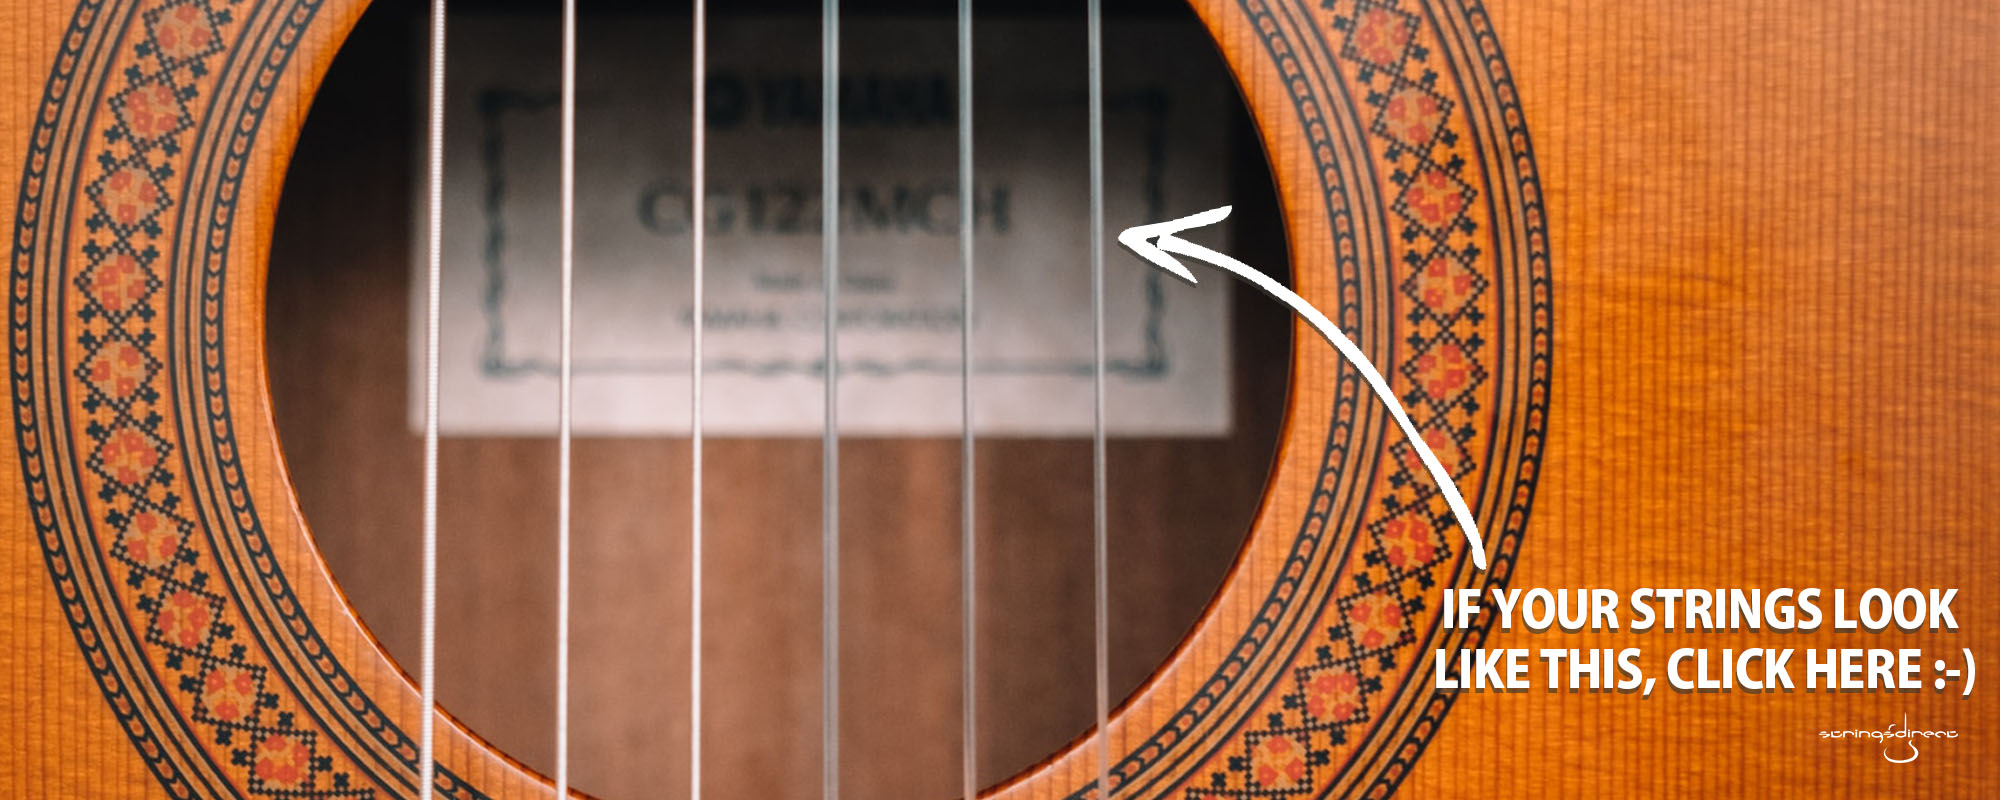 If your strings look like this click here - classical guitar buyers guide link